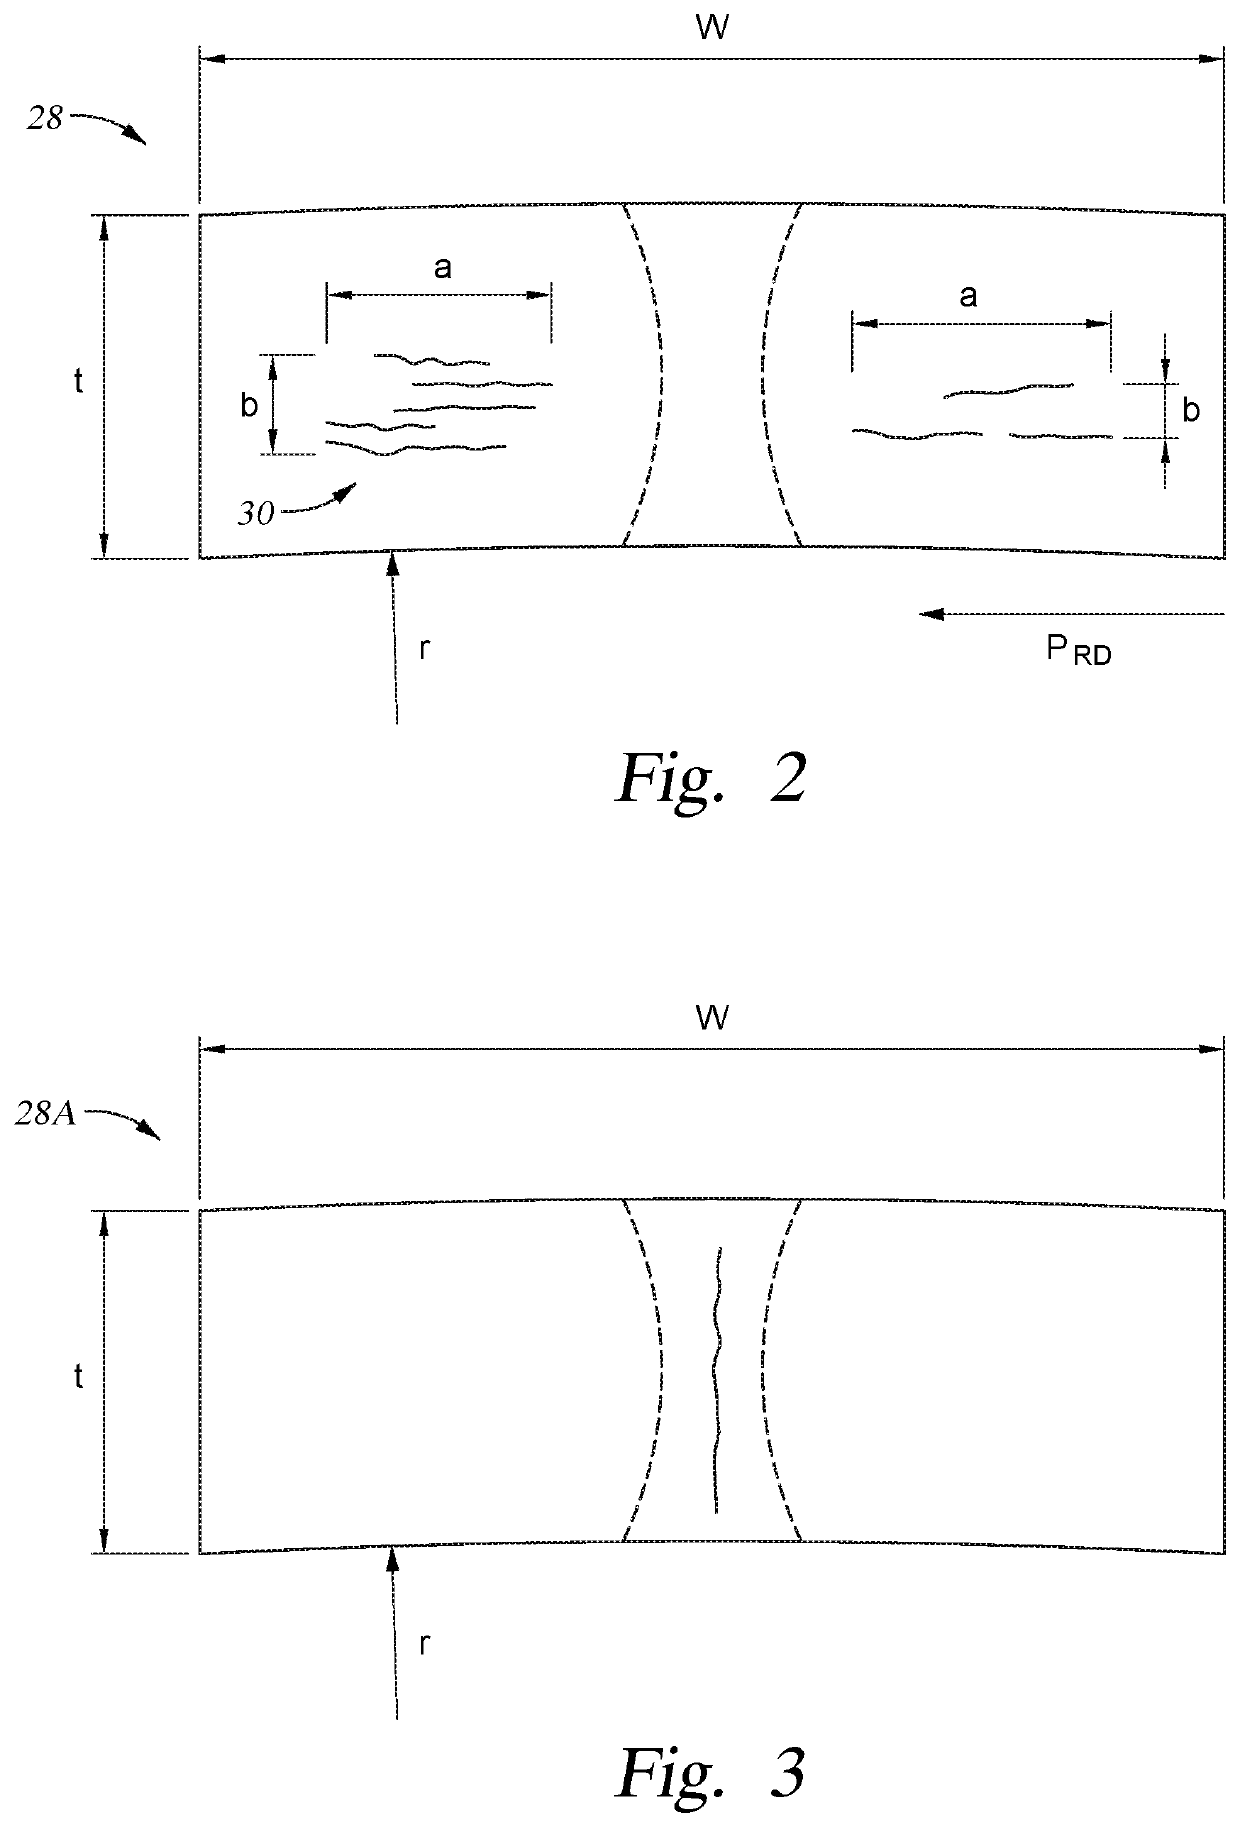 Method of testing erw pipe weld seam for susceptibility to hydrogen embrittlement